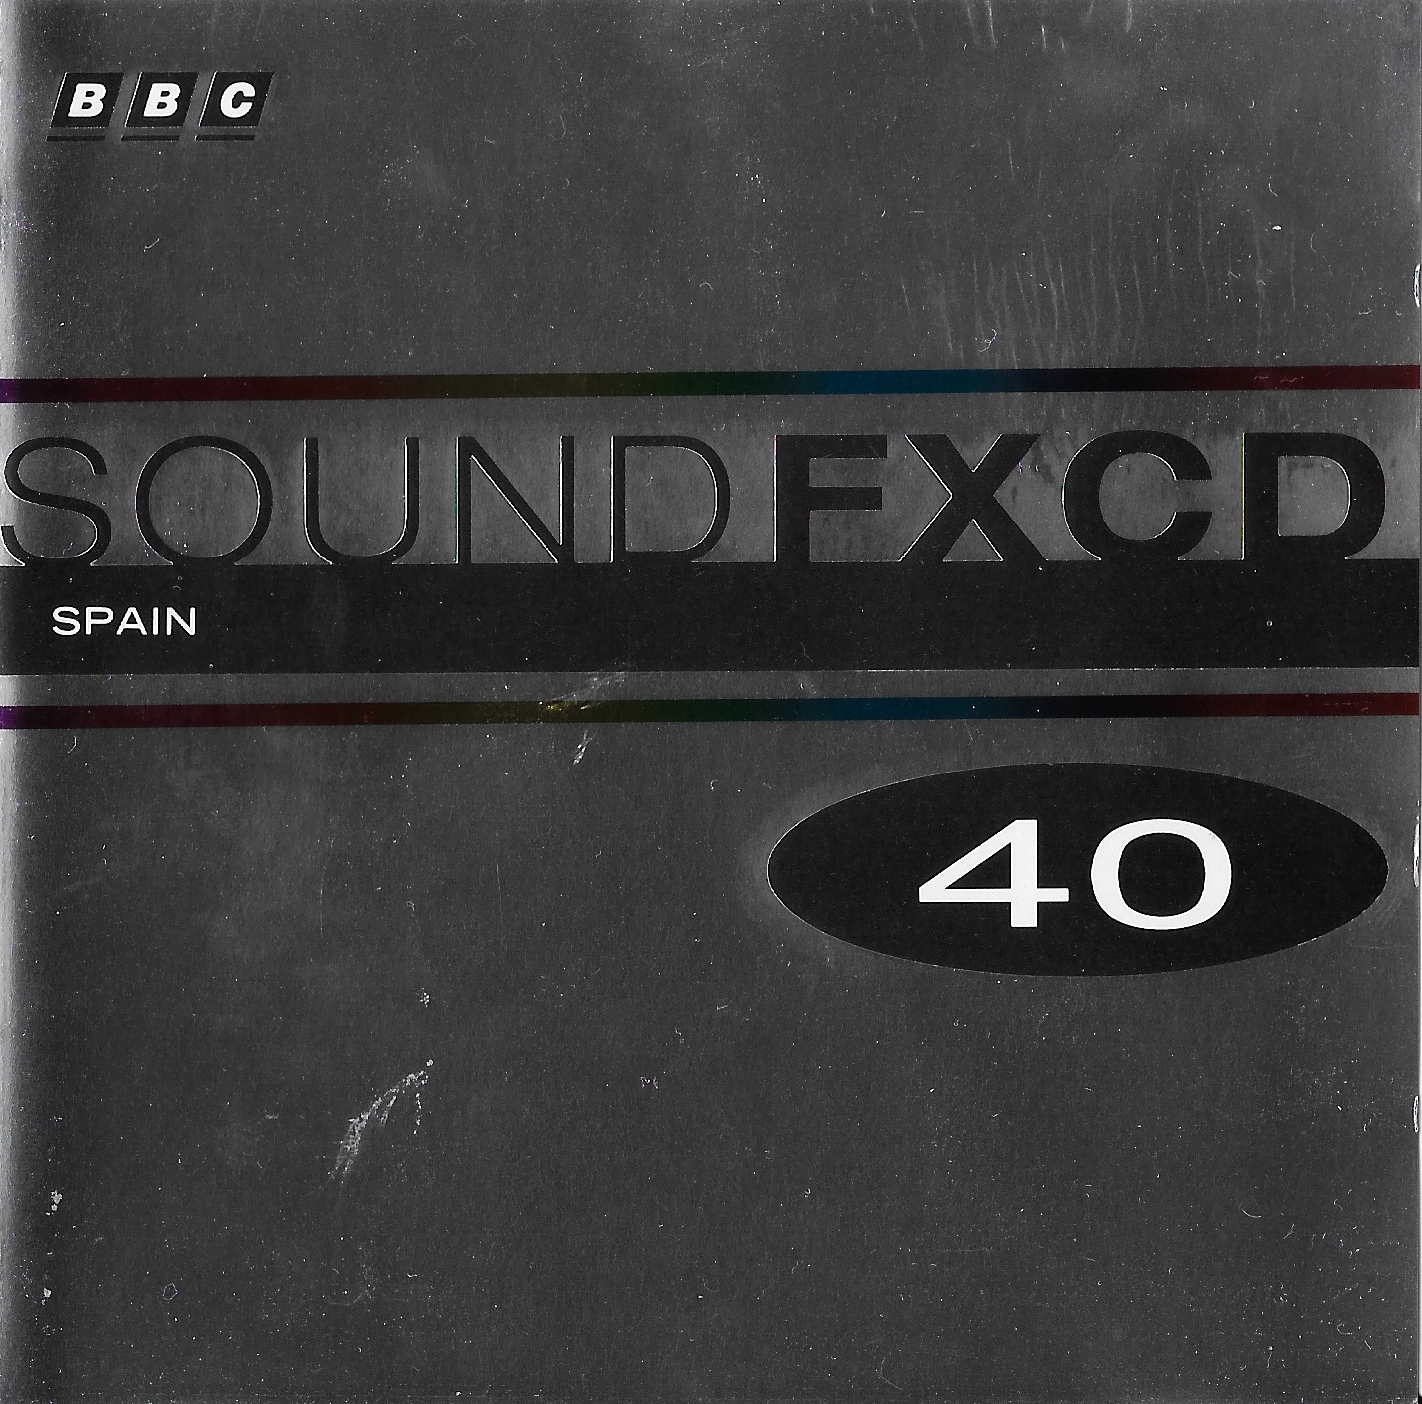 Front cover of BBCCD SFX040